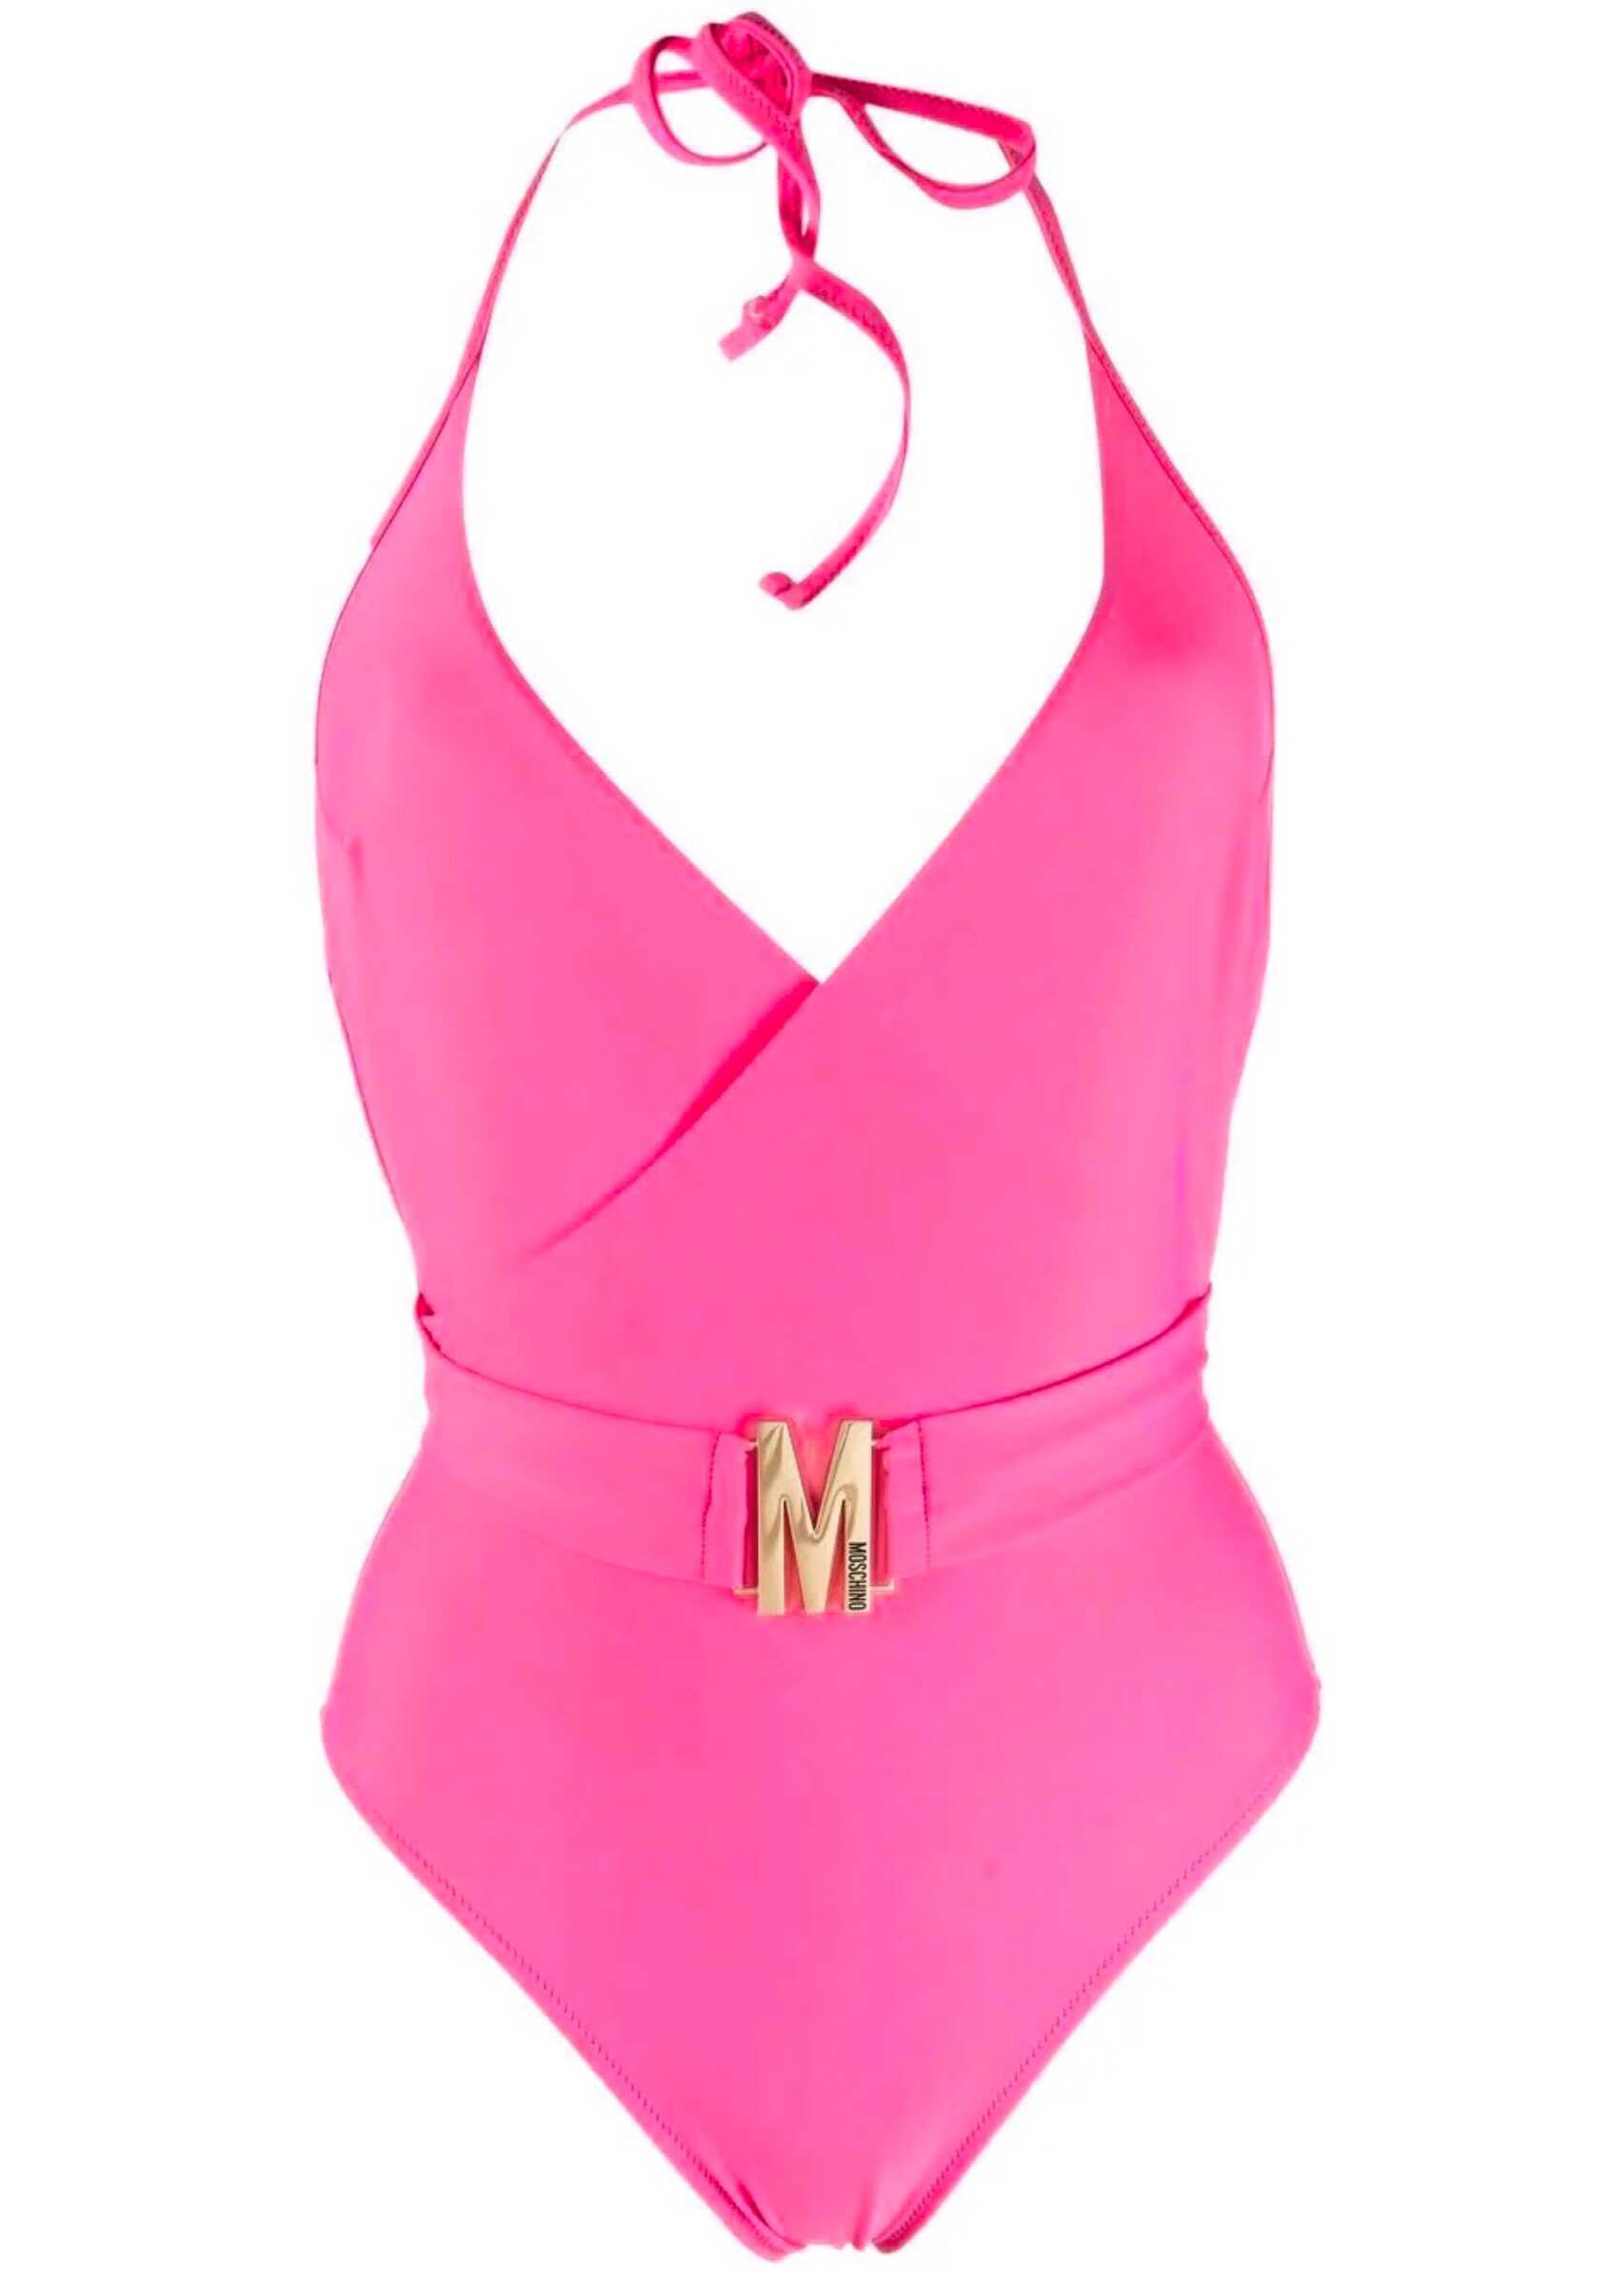 Moschino Logo Belted One Piece Swimsuit PINK image0